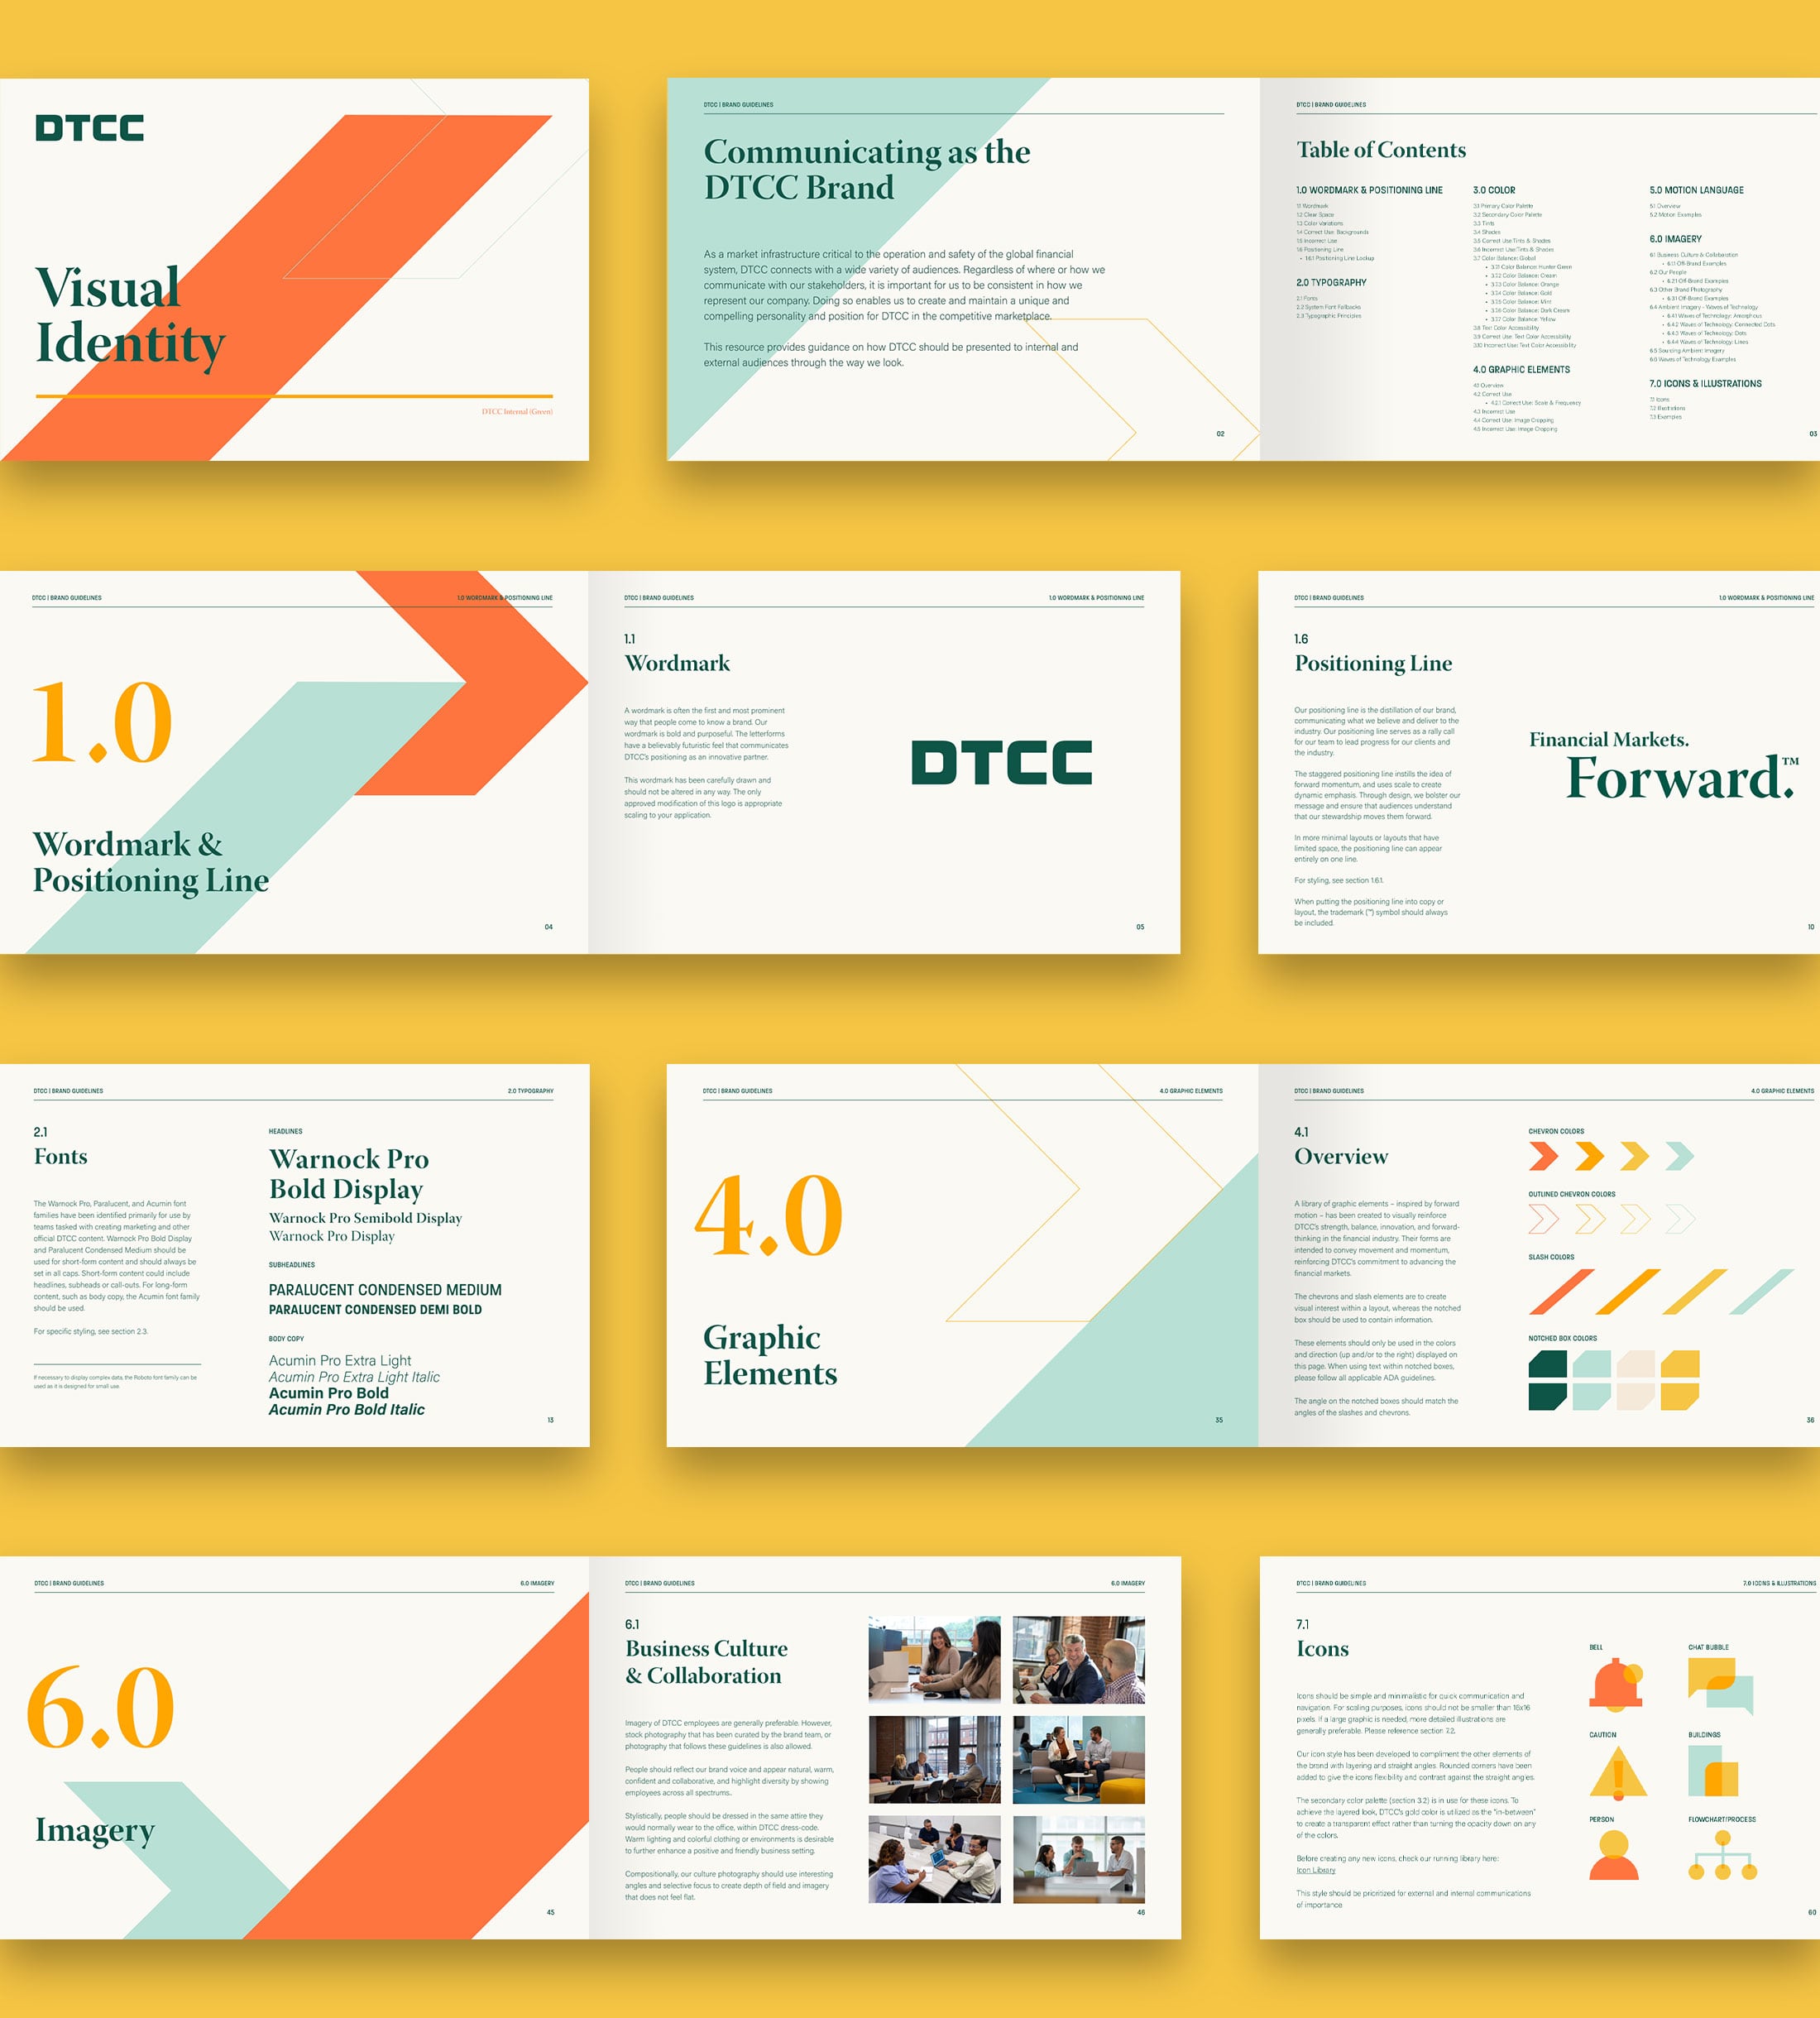 Spreads from DTCC's brand guidelines document